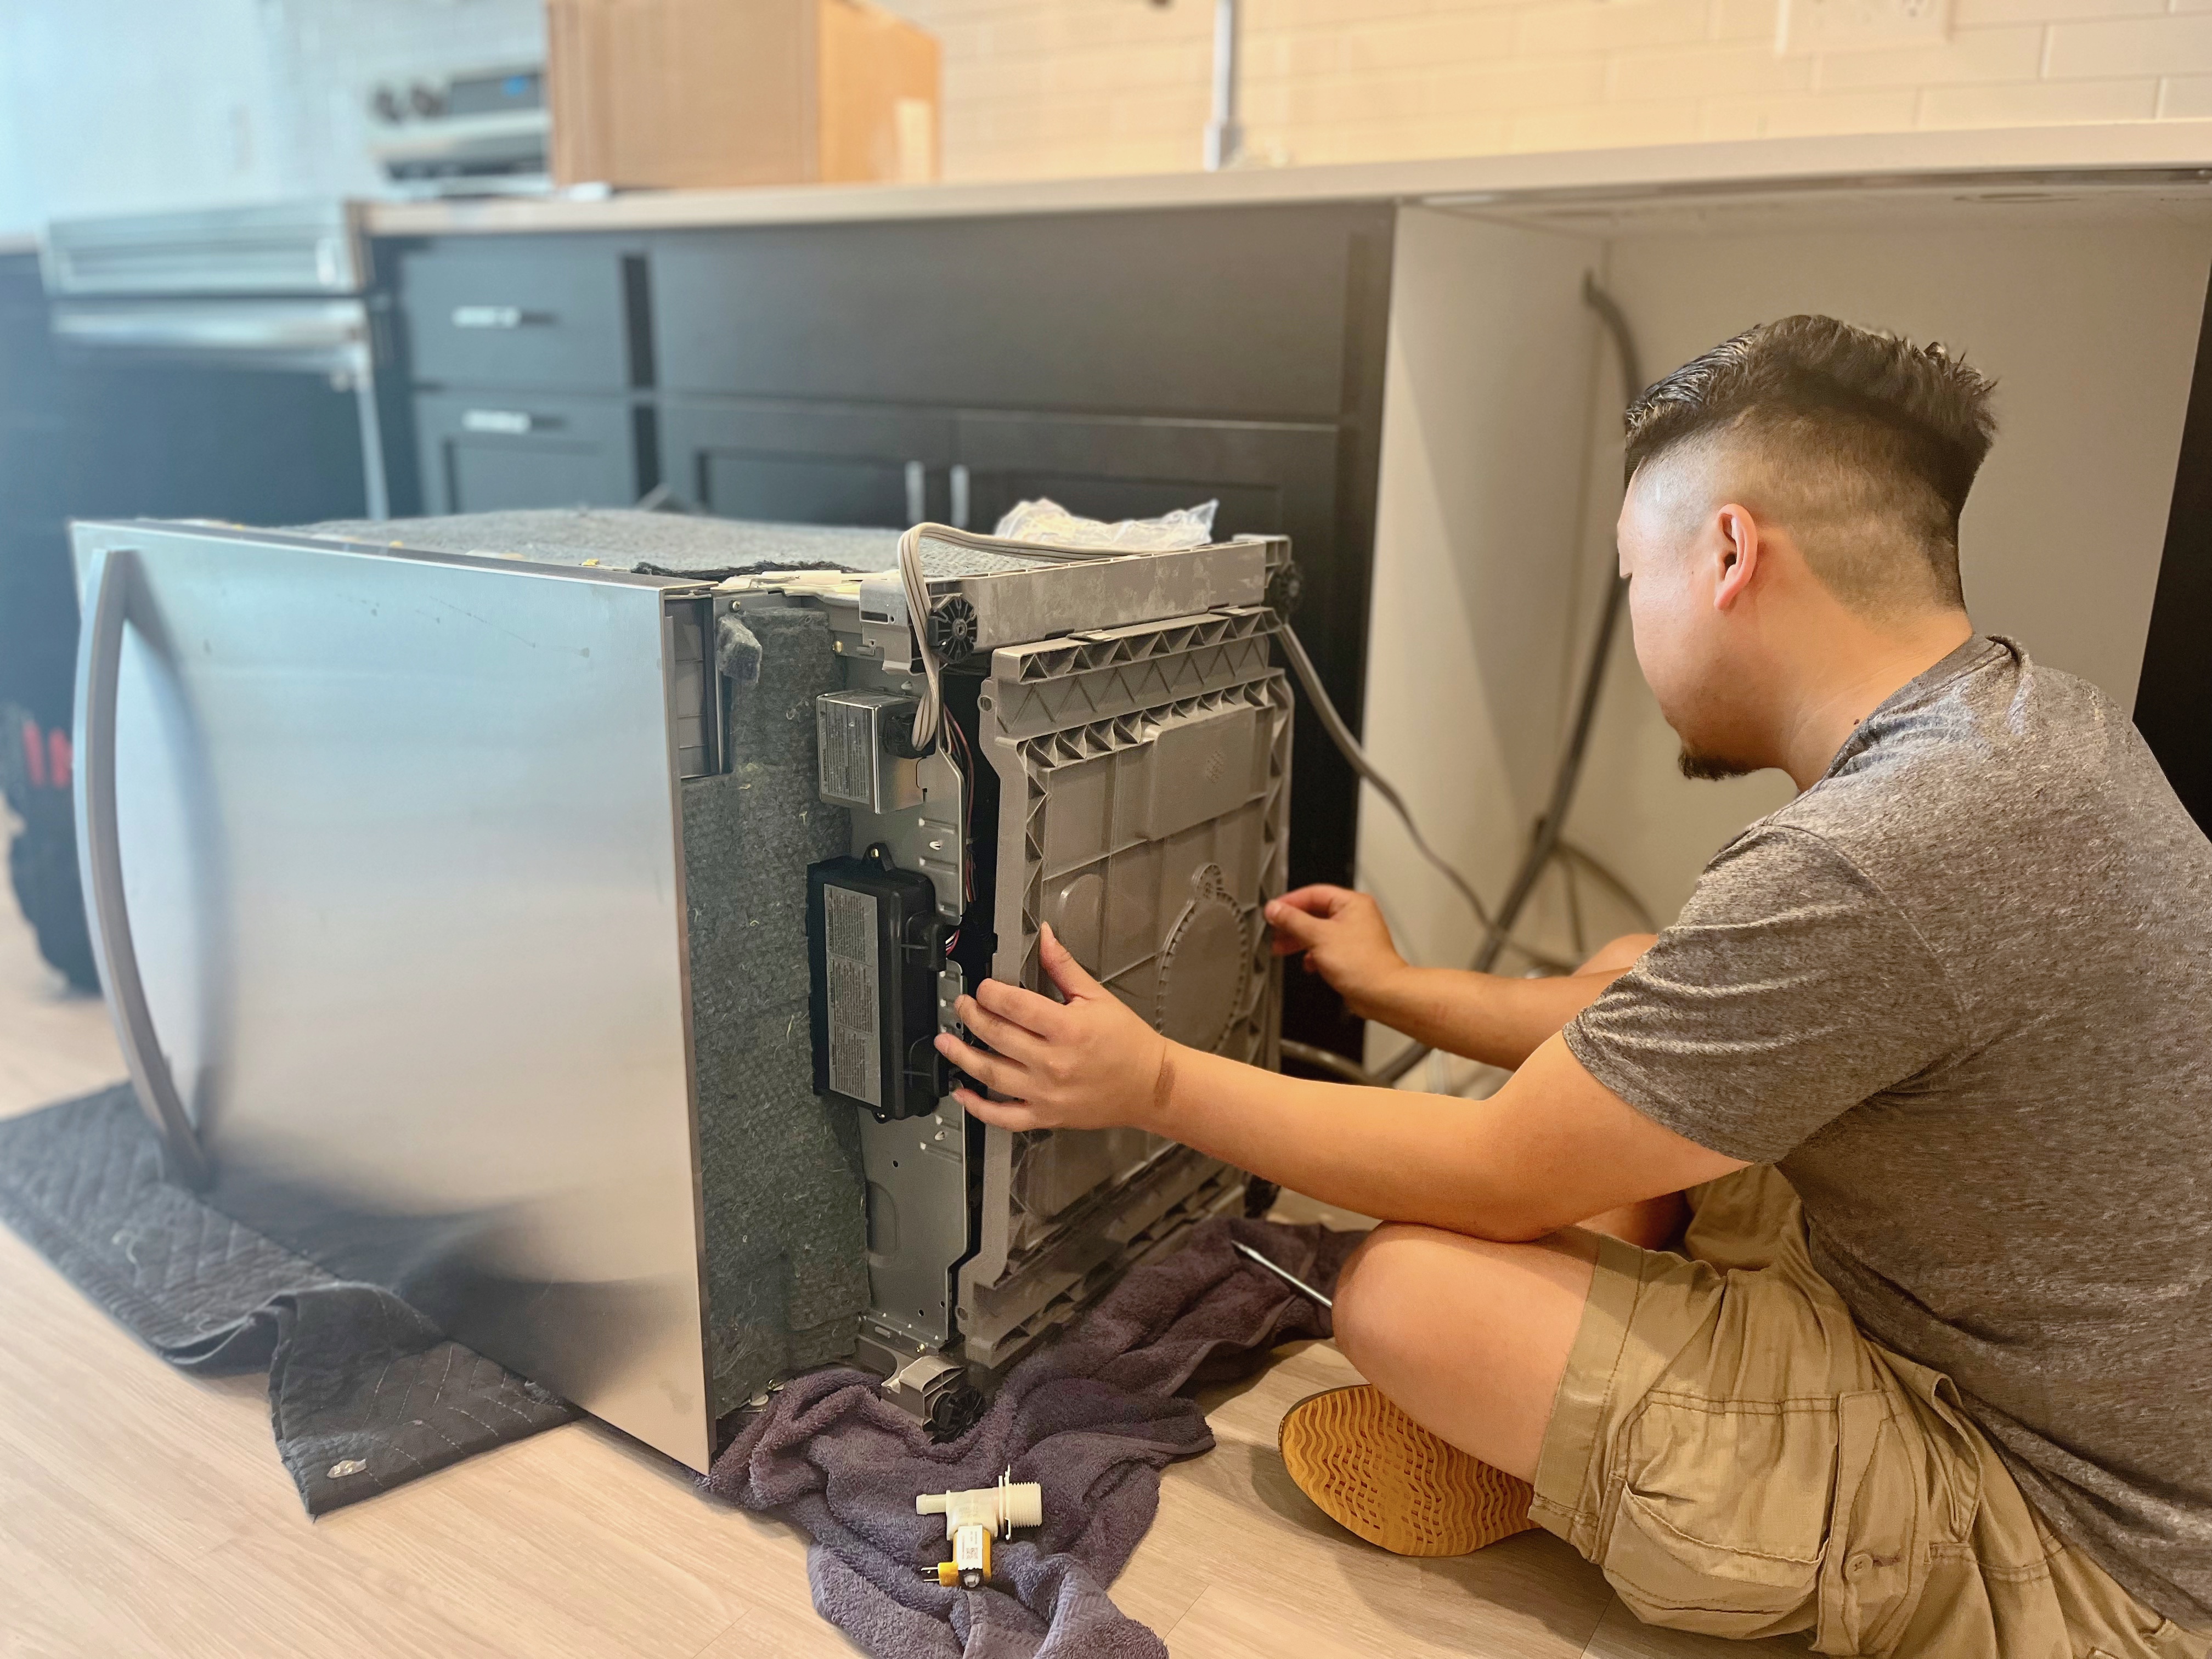 technicians repairs kitchen appliance at home